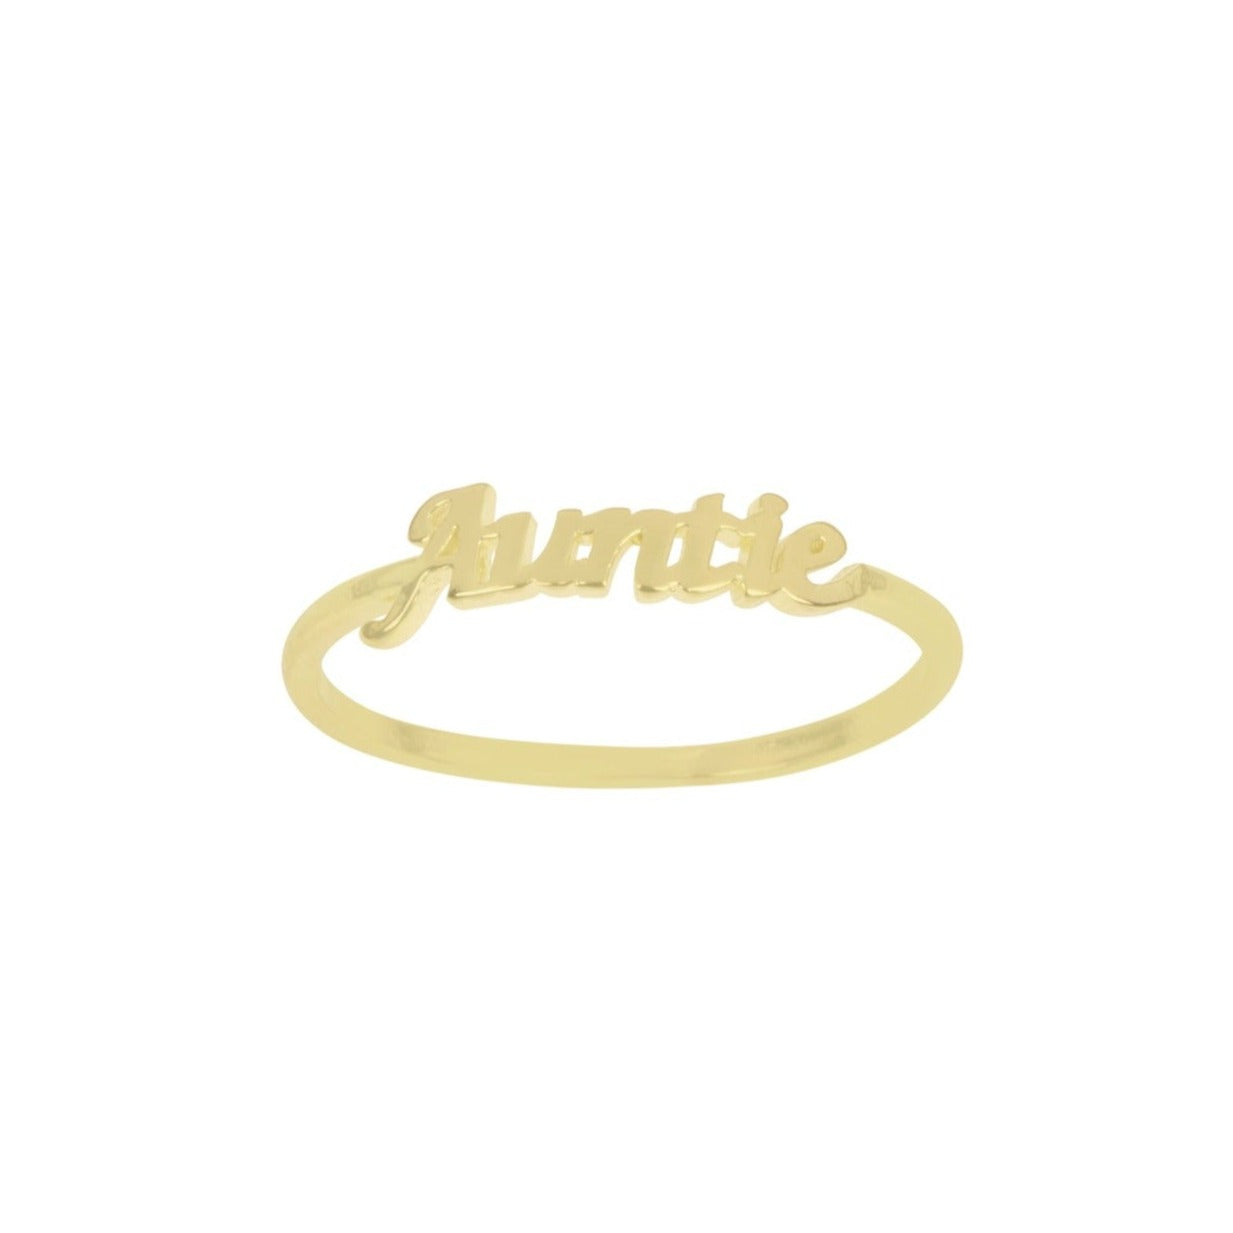 Dainty, delicate gold Auntie stacking ring, made in America by Katie Dean Jewelry